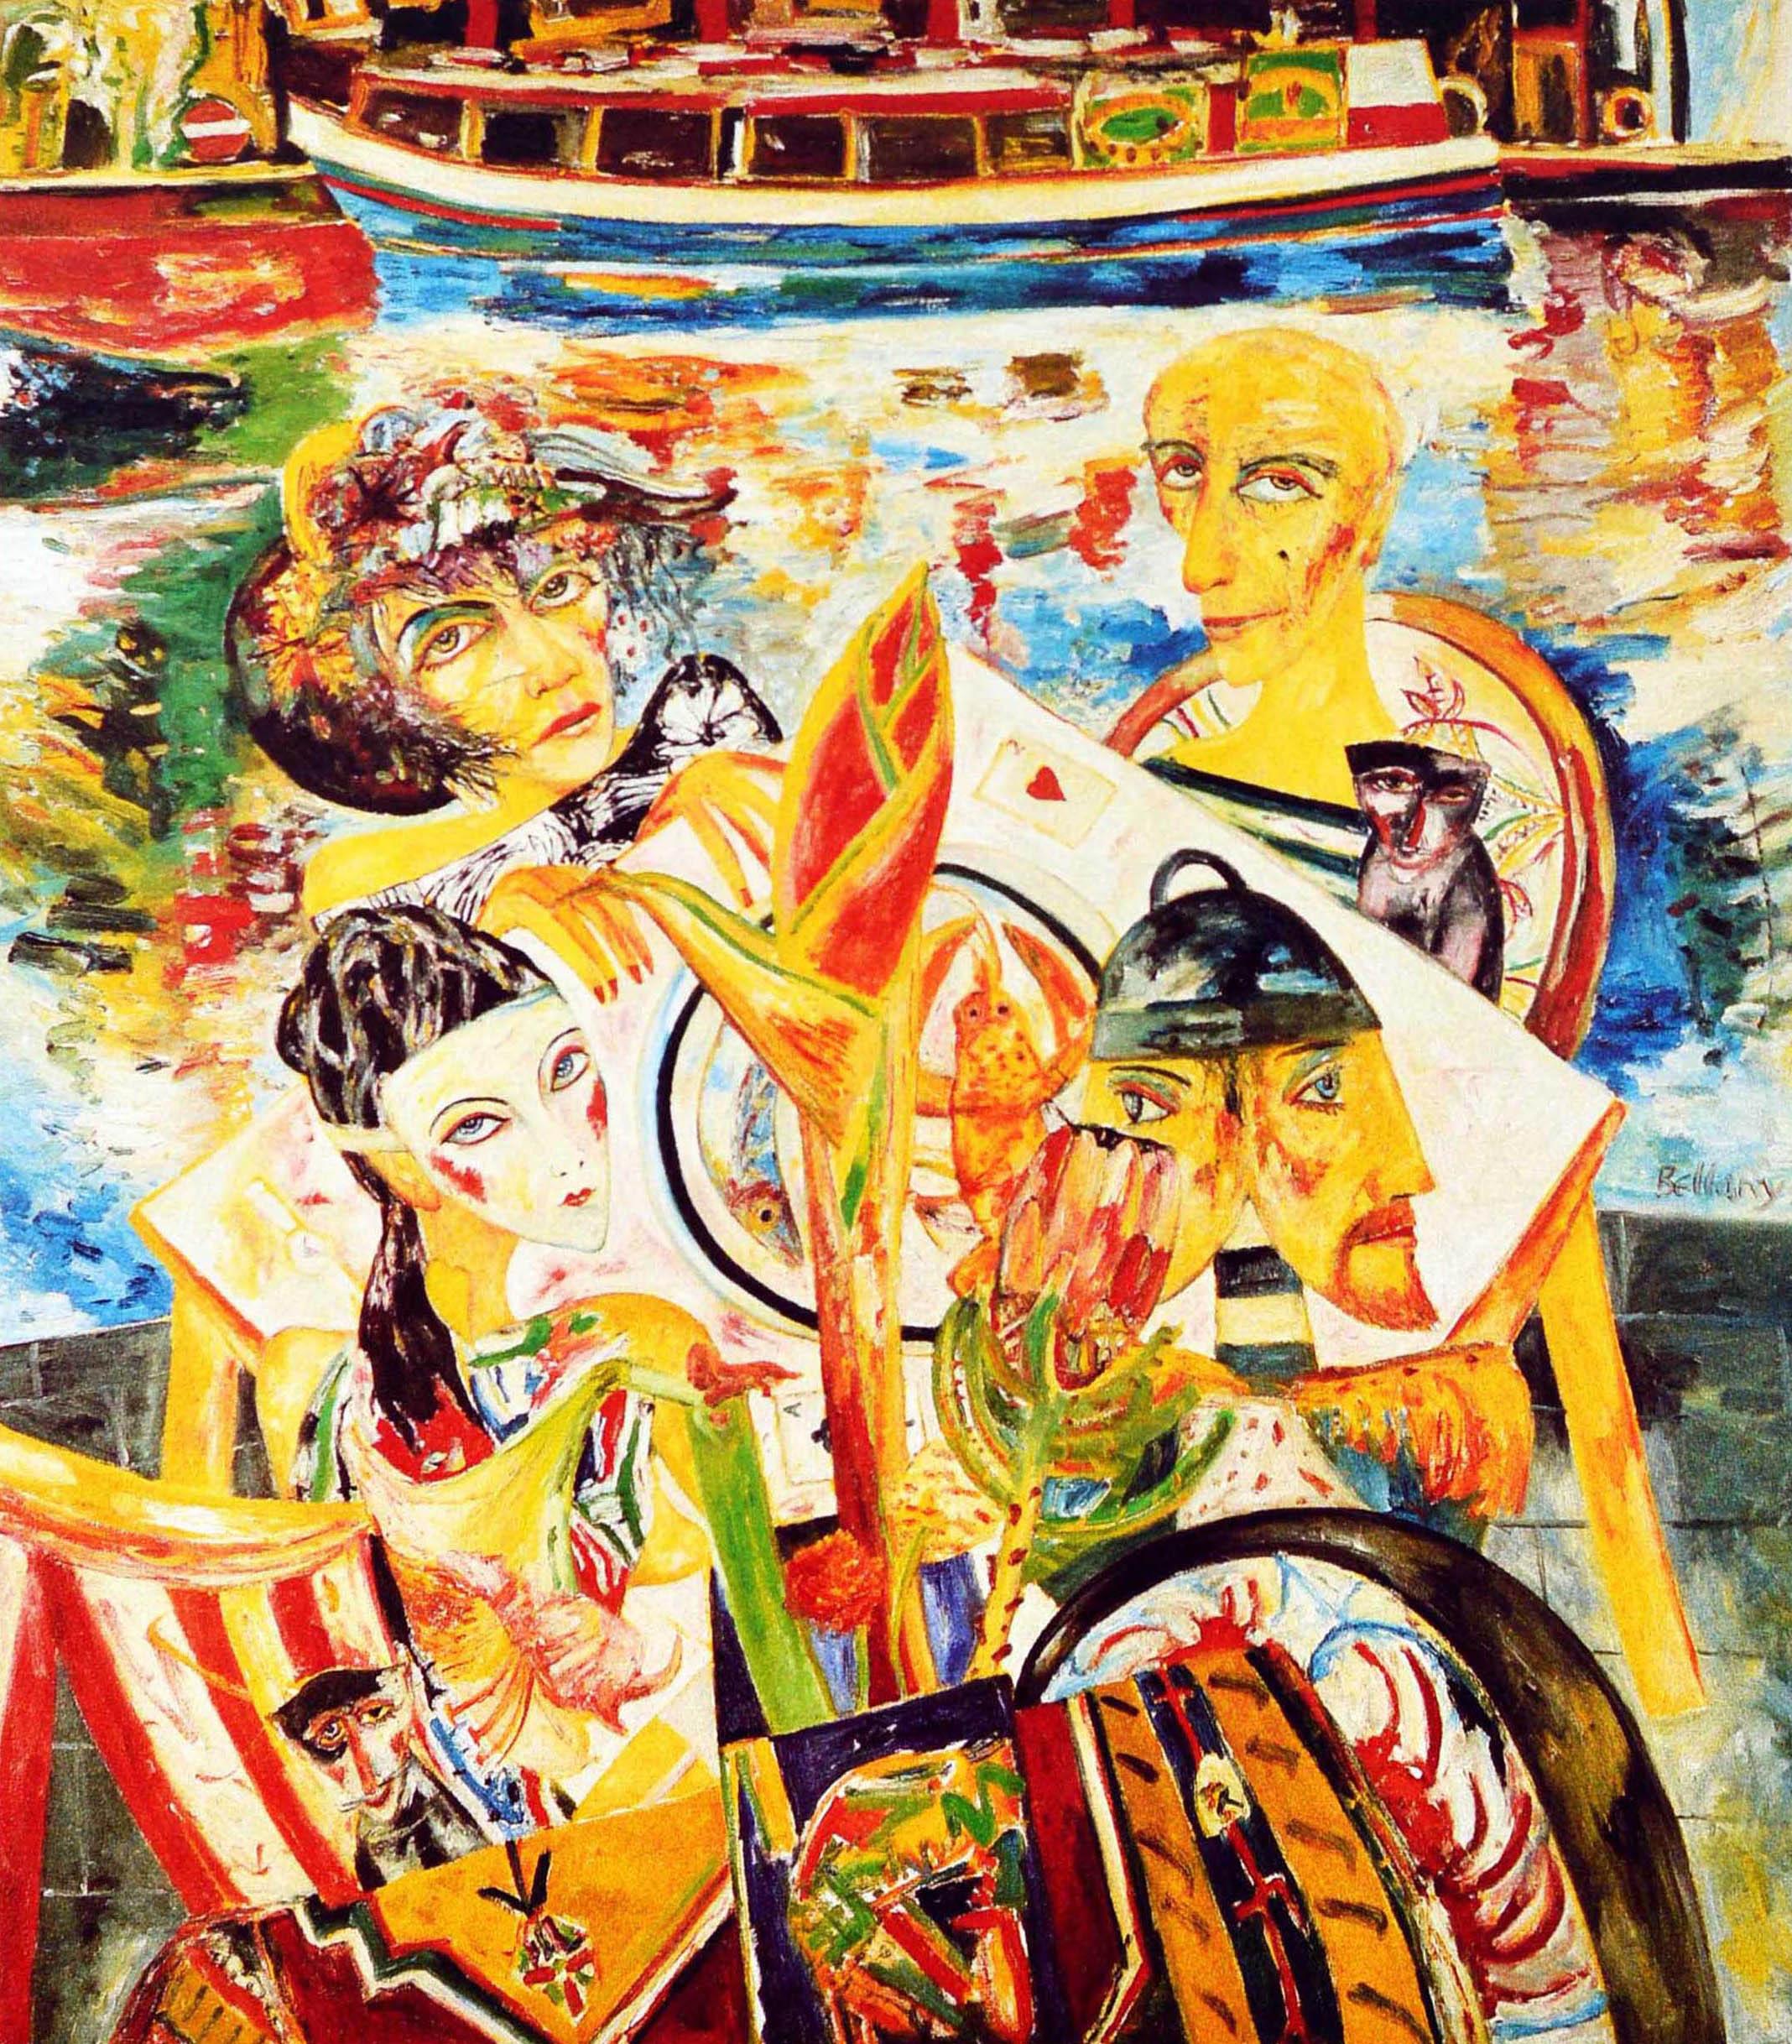 Original vintage London Underground poster for Camden Lock nearest station Camden Town. Colourful illustration depicting people enjoying a lobster meal at a table with canal boats on the water. Art on the Underground - Camden Lock by John Bellany a